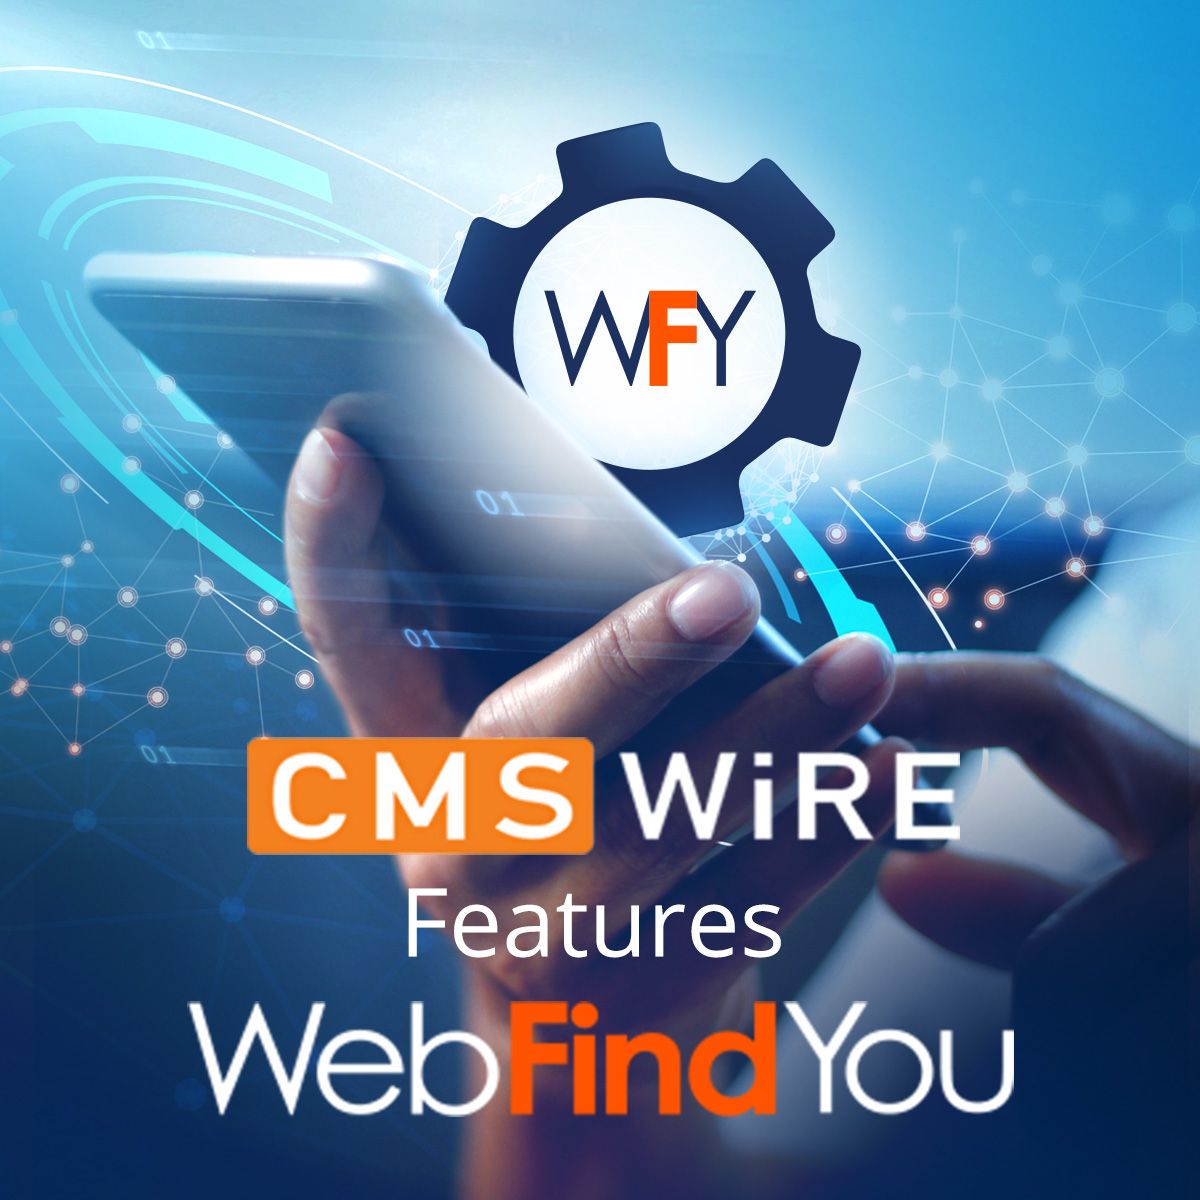 CMSWire Features WebFindYou